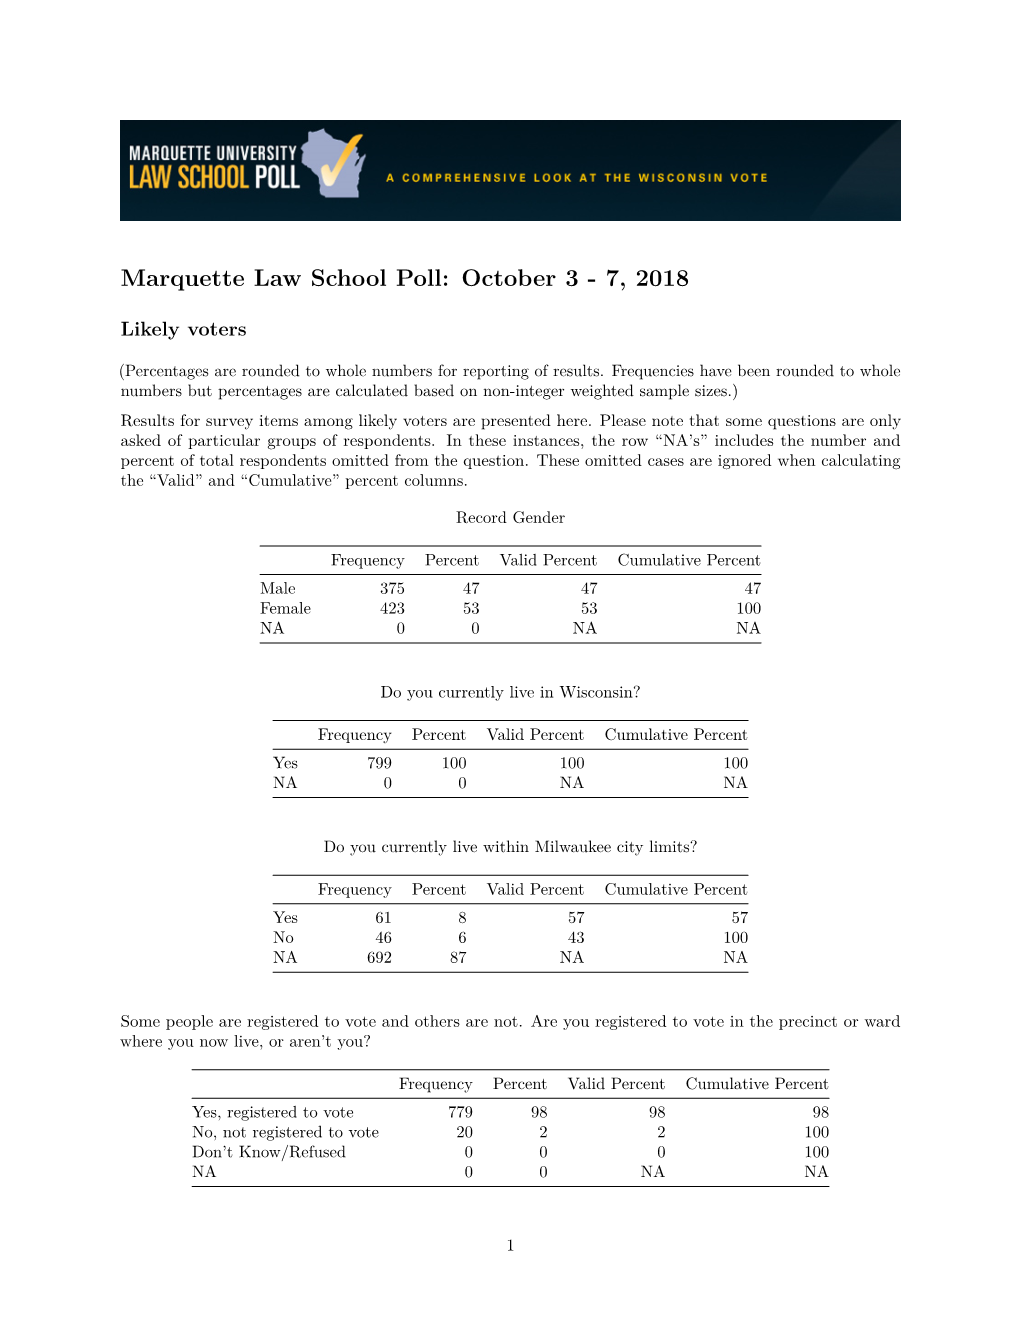 Marquette Law School Poll, October 3-7, 2018 Topline Results for Likely